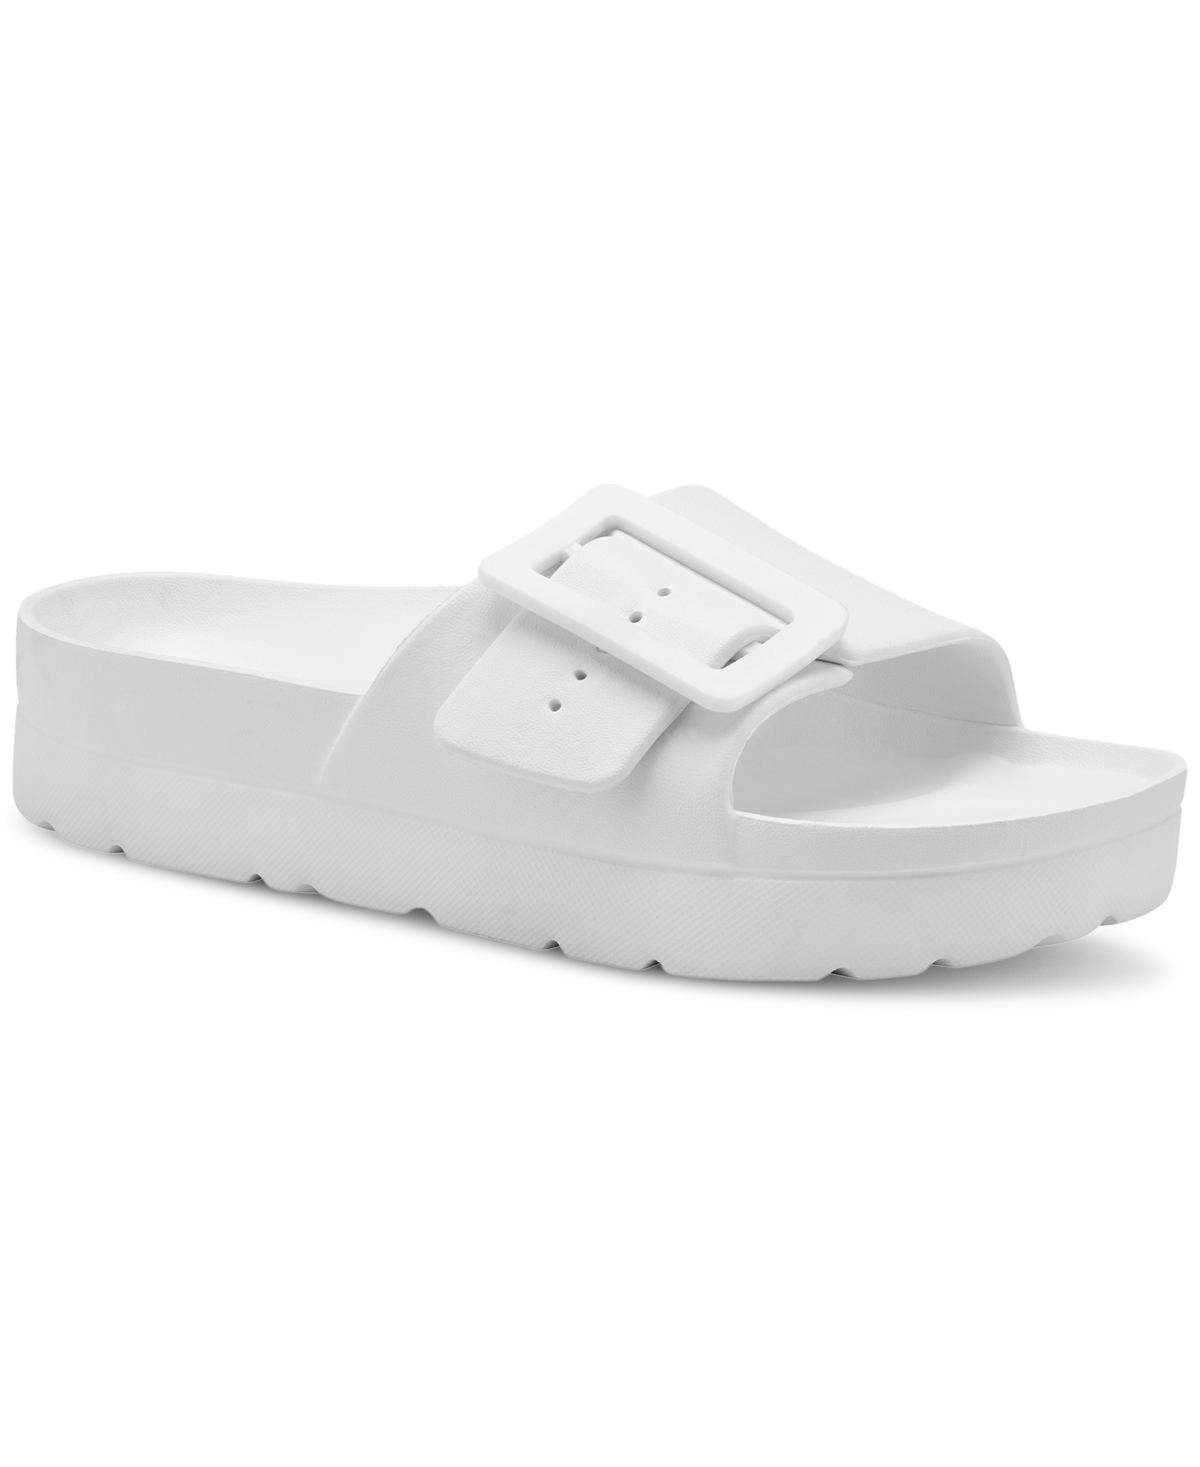 Remeee Buckle Slide Sandals, Created for Macy's - Light Blue